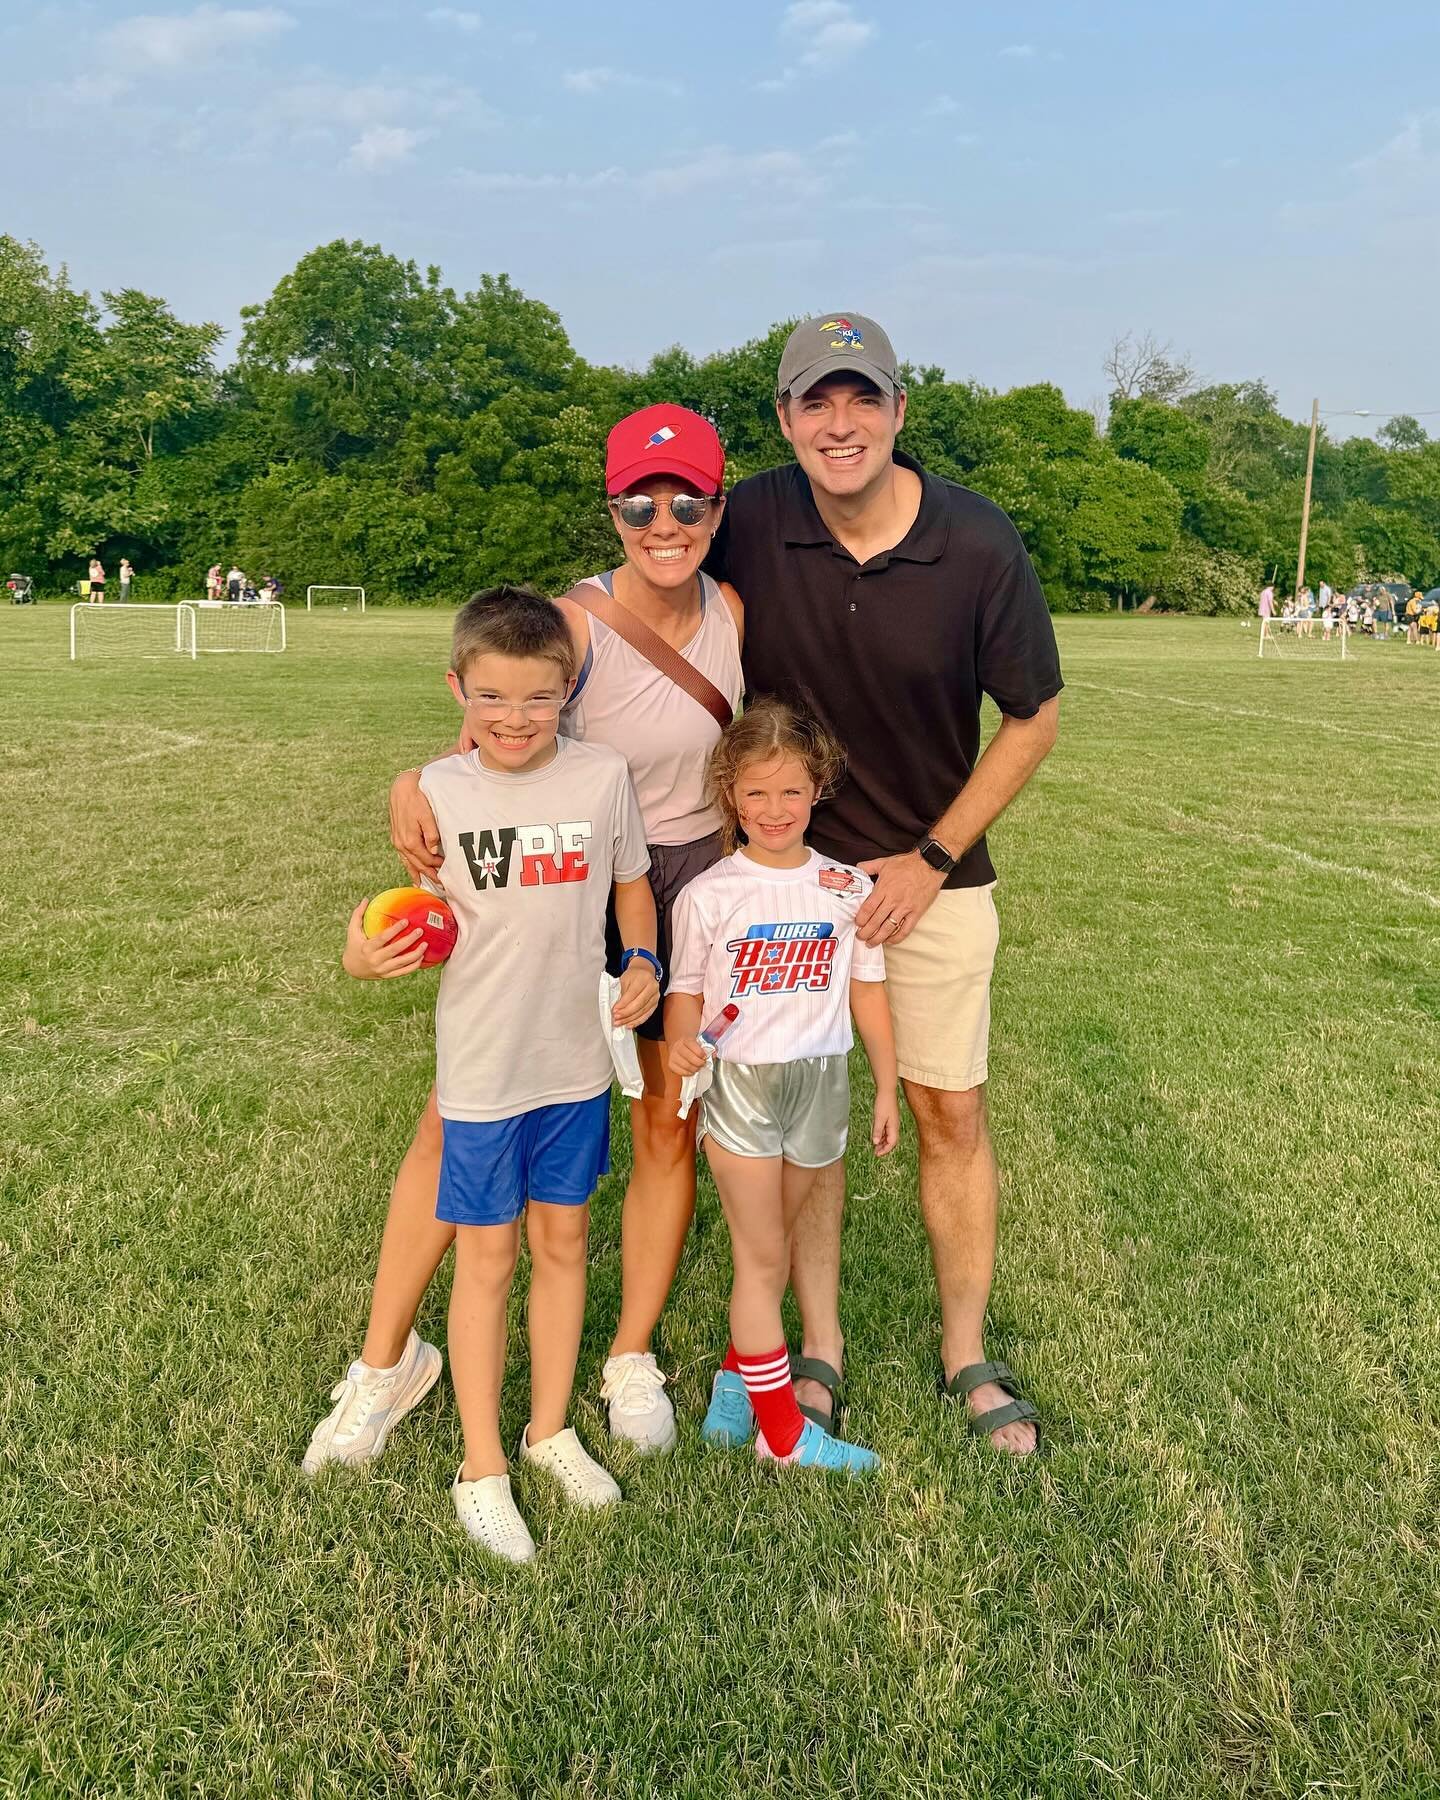 We survived May 🏆 (I realize there is another week left, but summer starts tomorrow for us.) Busy, but happy soaking up these glory days. 

1 - Em finished soccer
2 - Beast Feast
3 - Nephew visits 
4 - Showered Baby B
5 - Mystery reader
6 - Big Girl